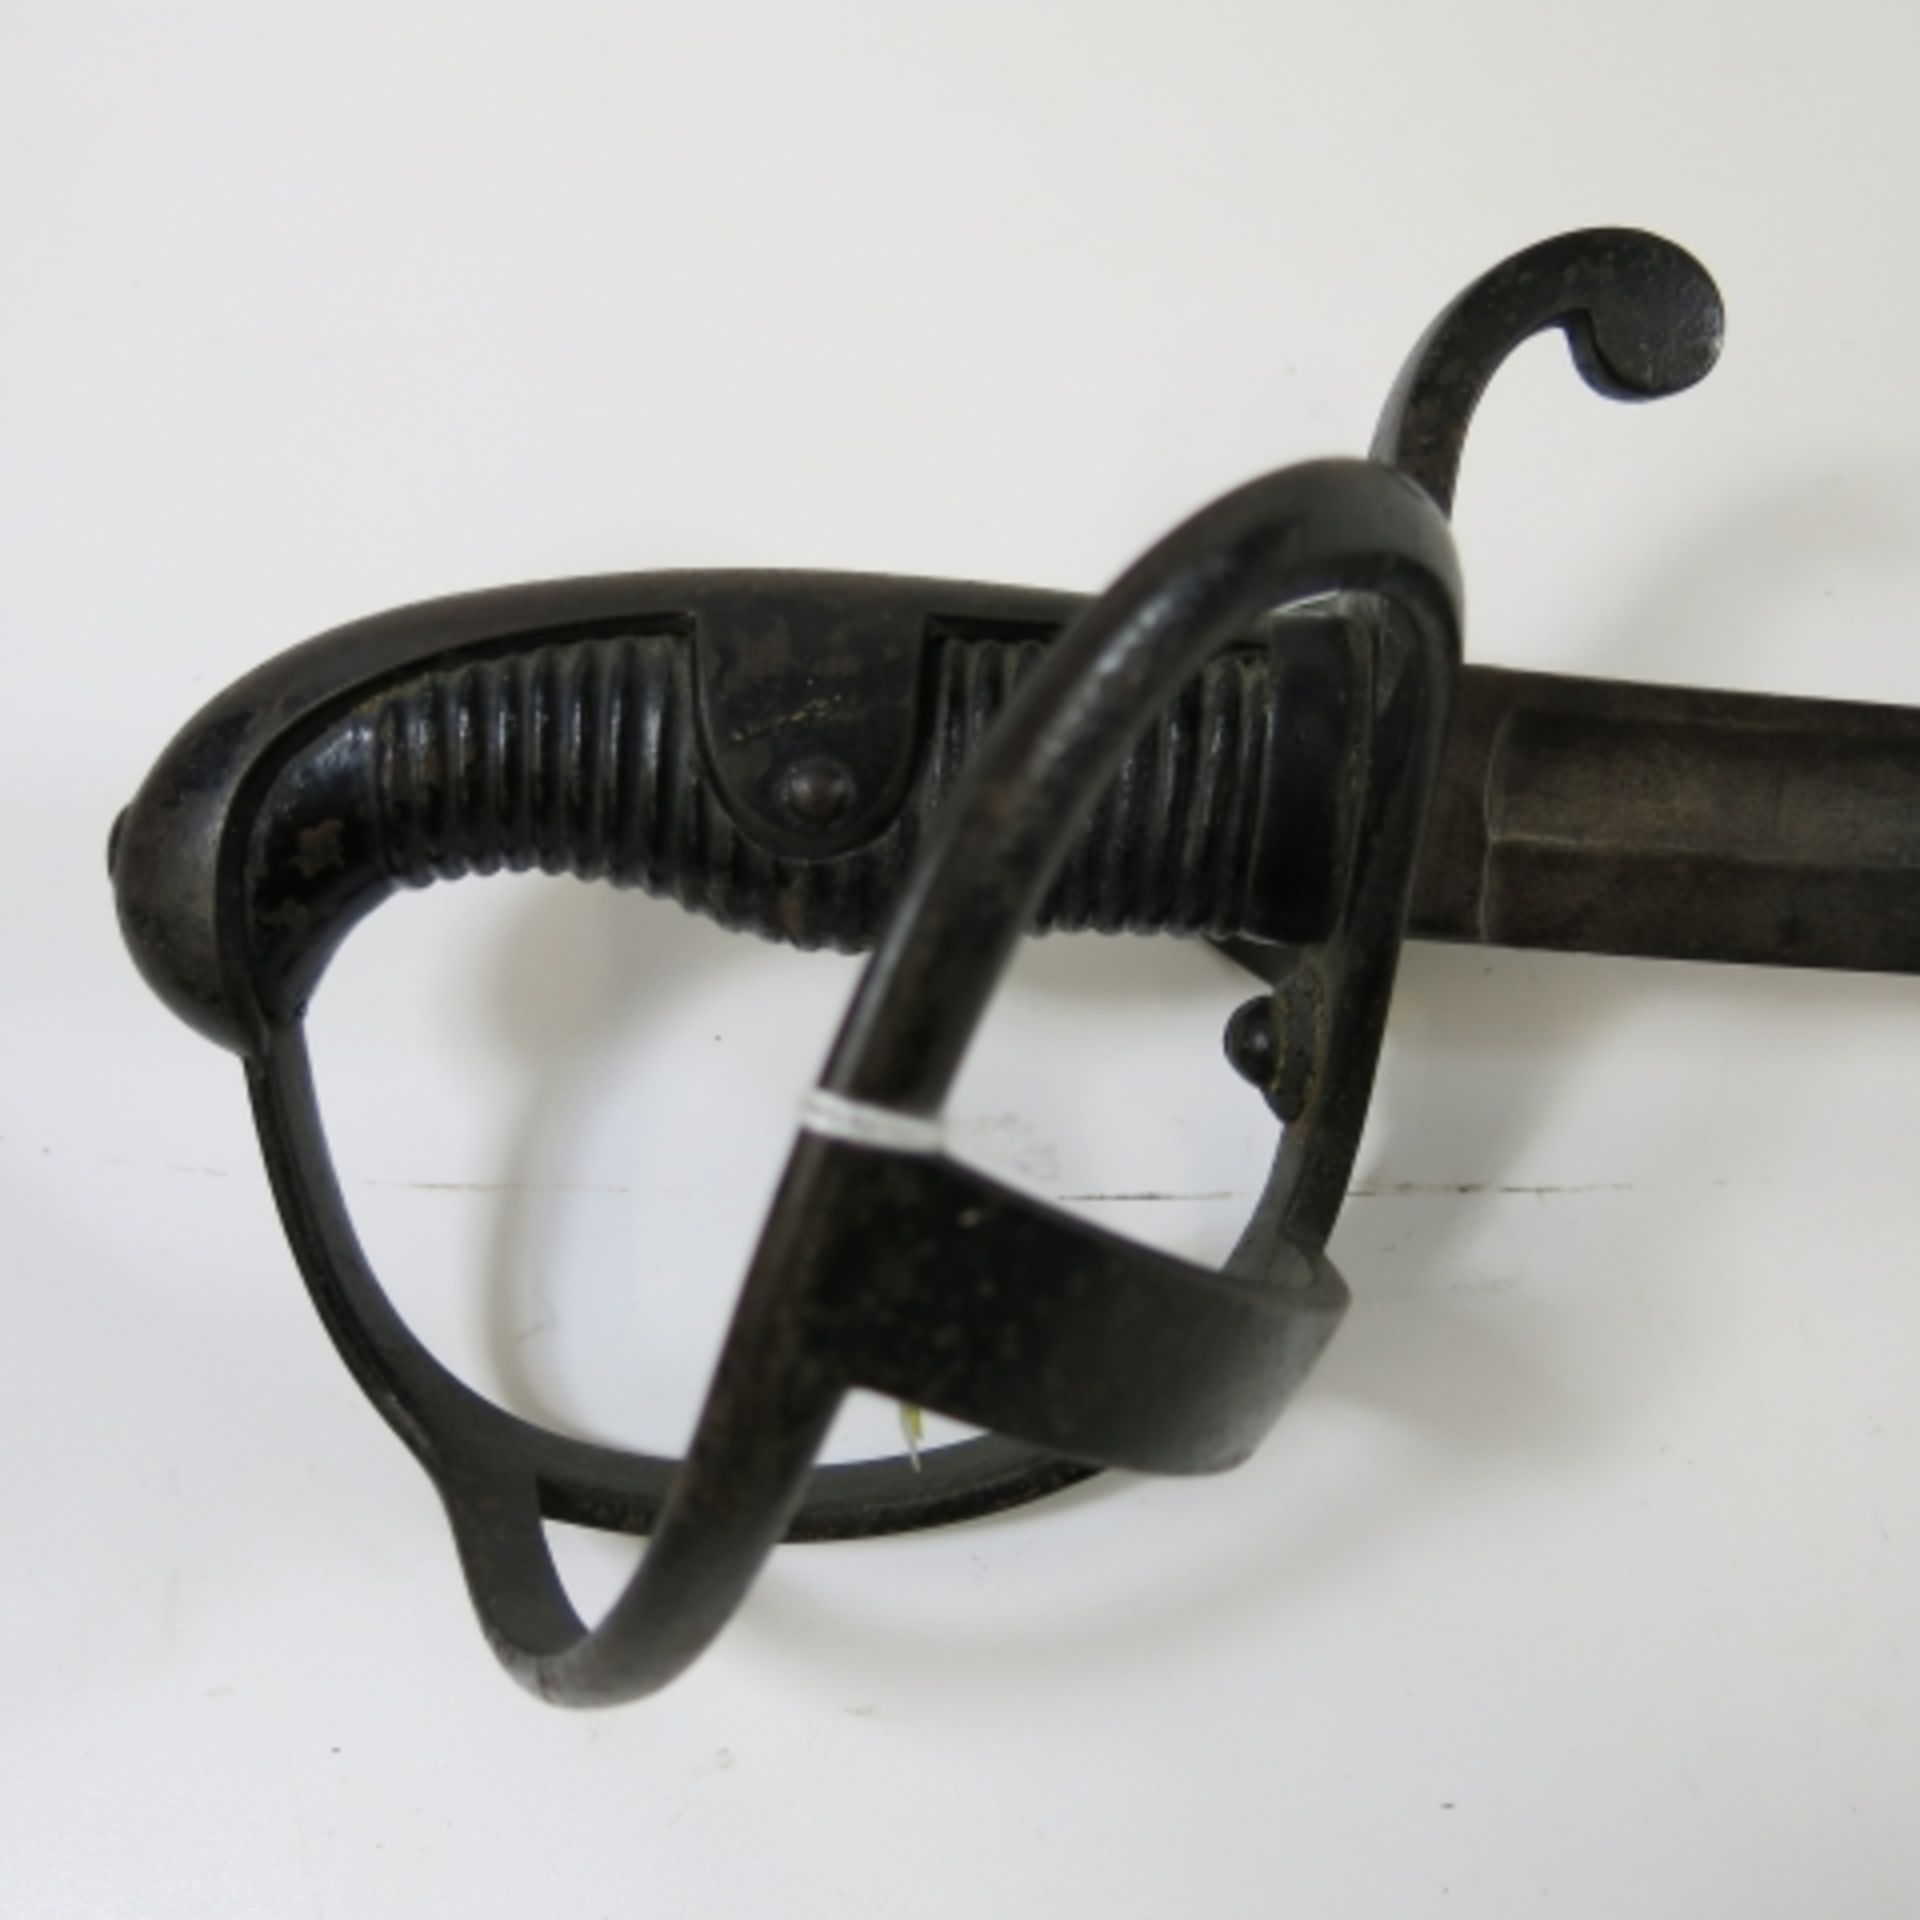 Early 20th century German Cavalry Sword, open basket with wooden grip. 90cm curved blade with - Image 2 of 3